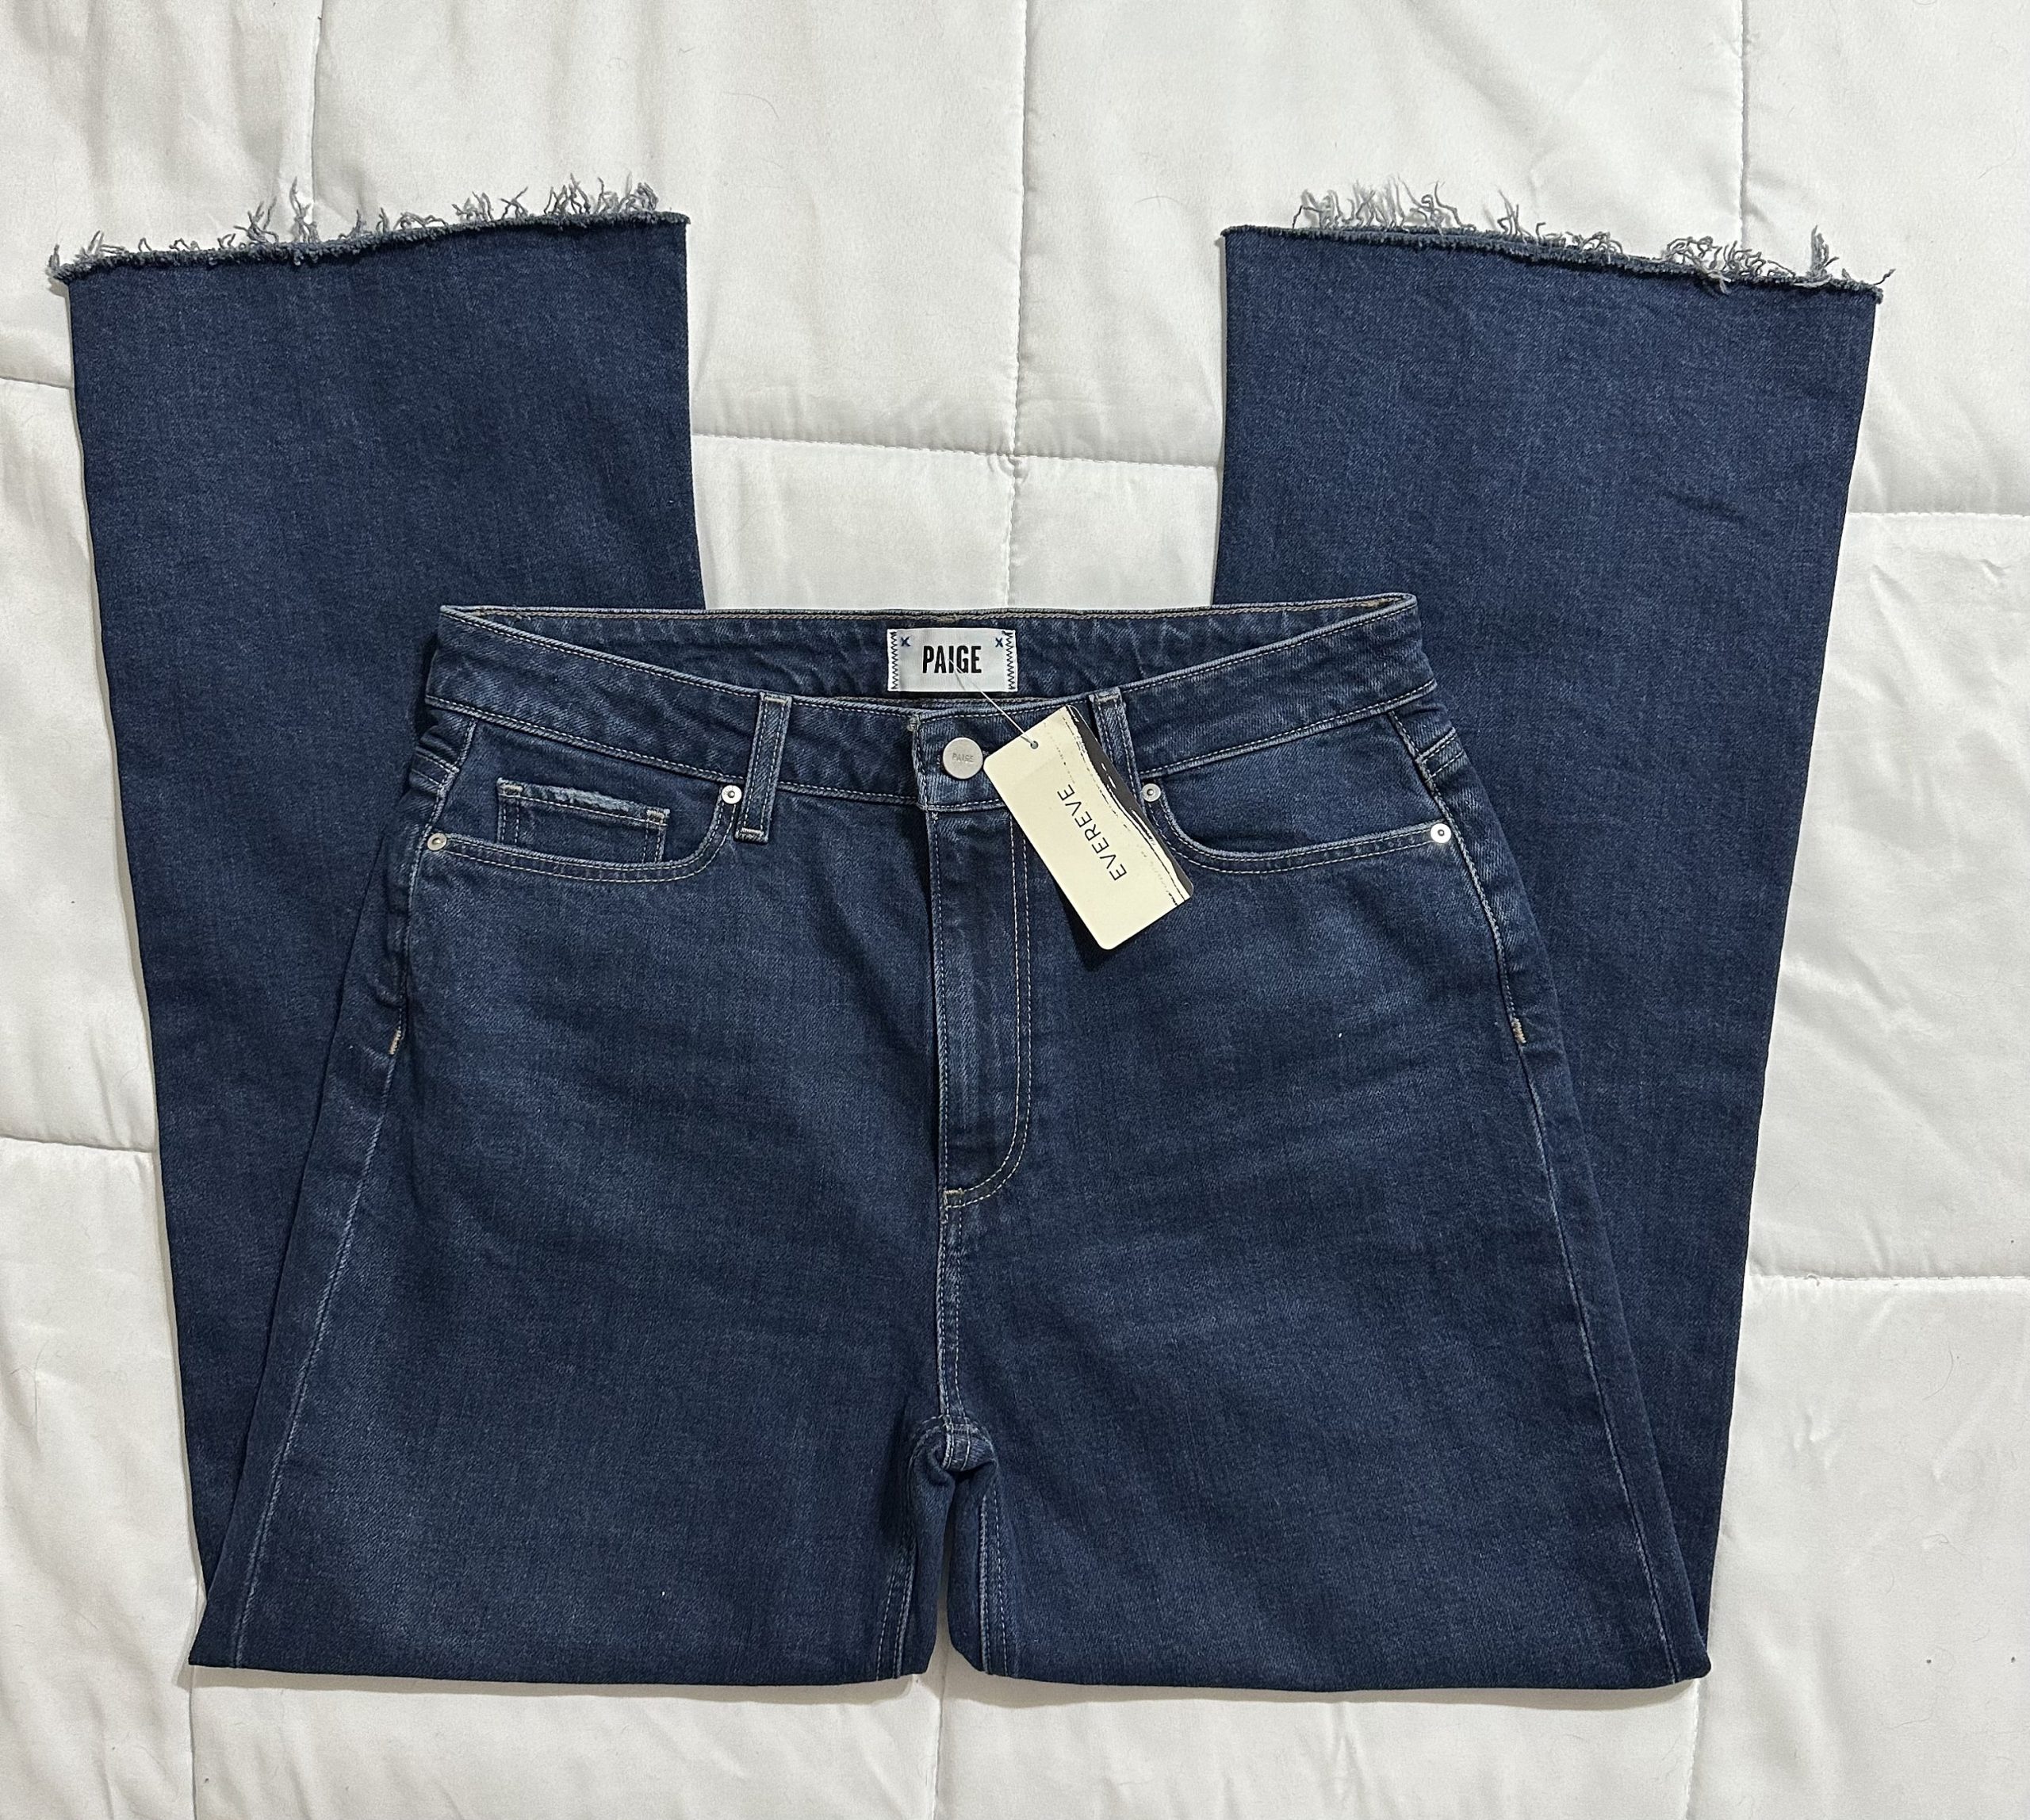 evereve jeans